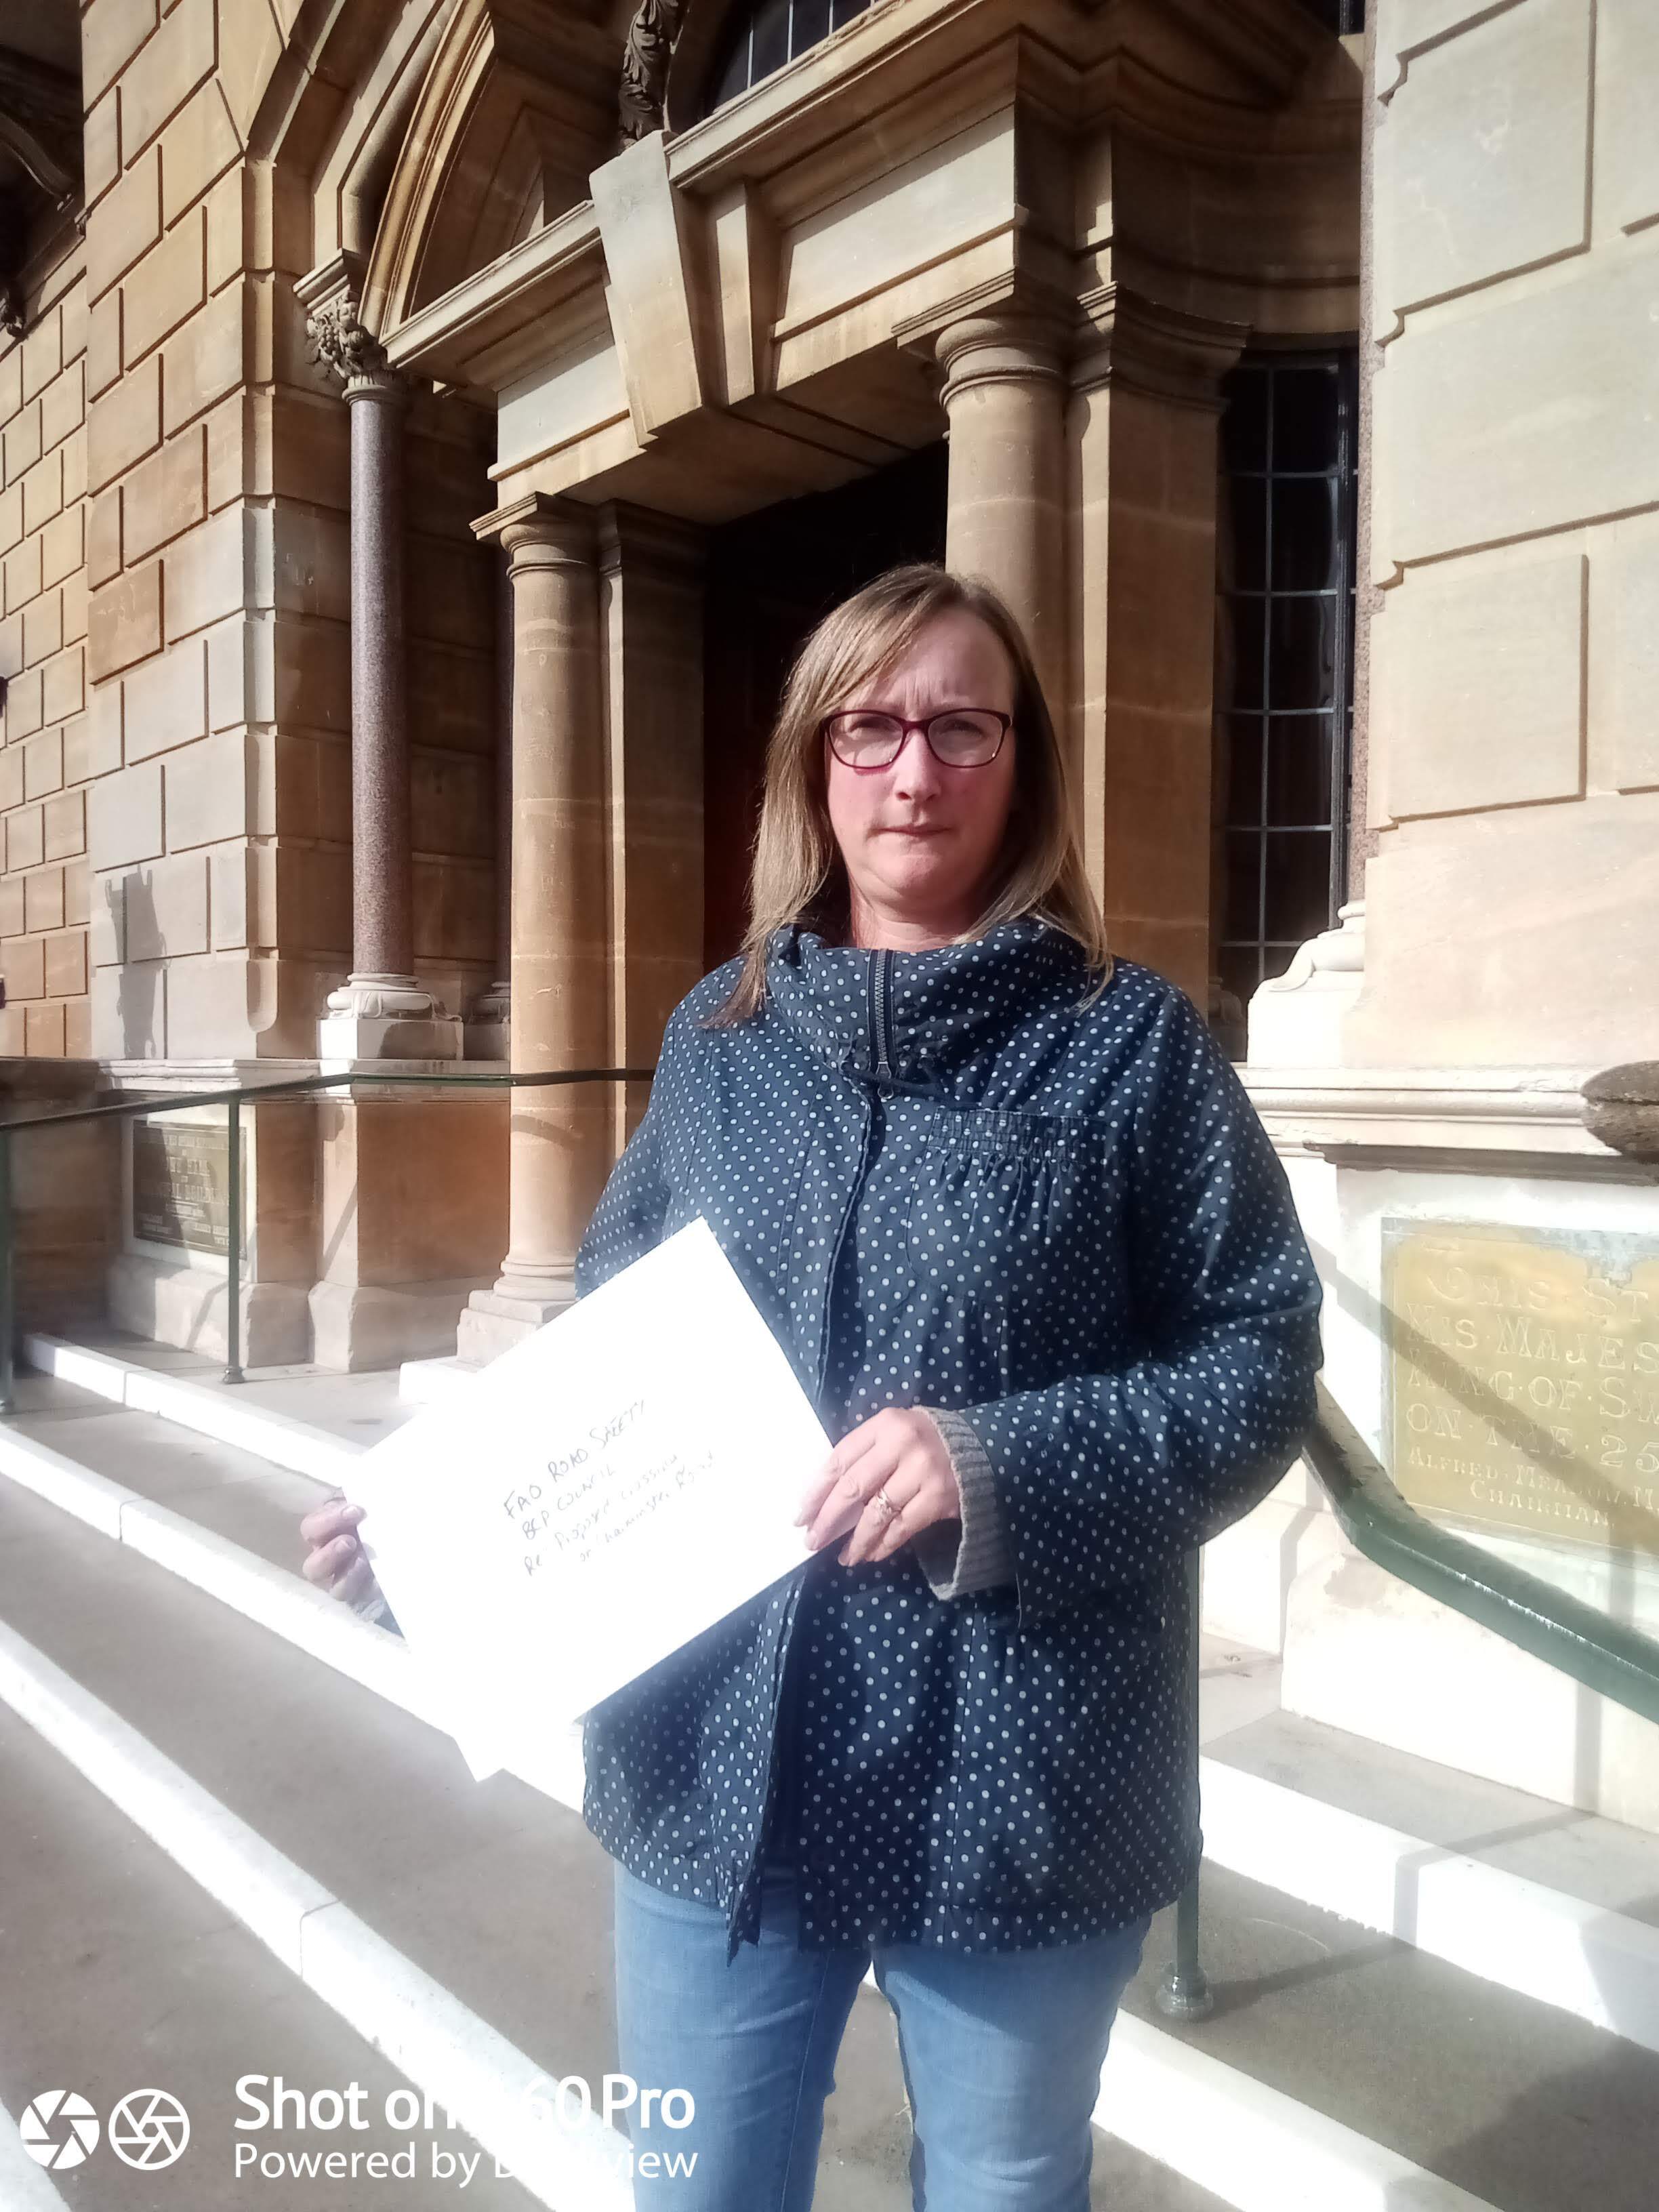 Kate Salmon's second petition hand-in at BCP Civic Centre